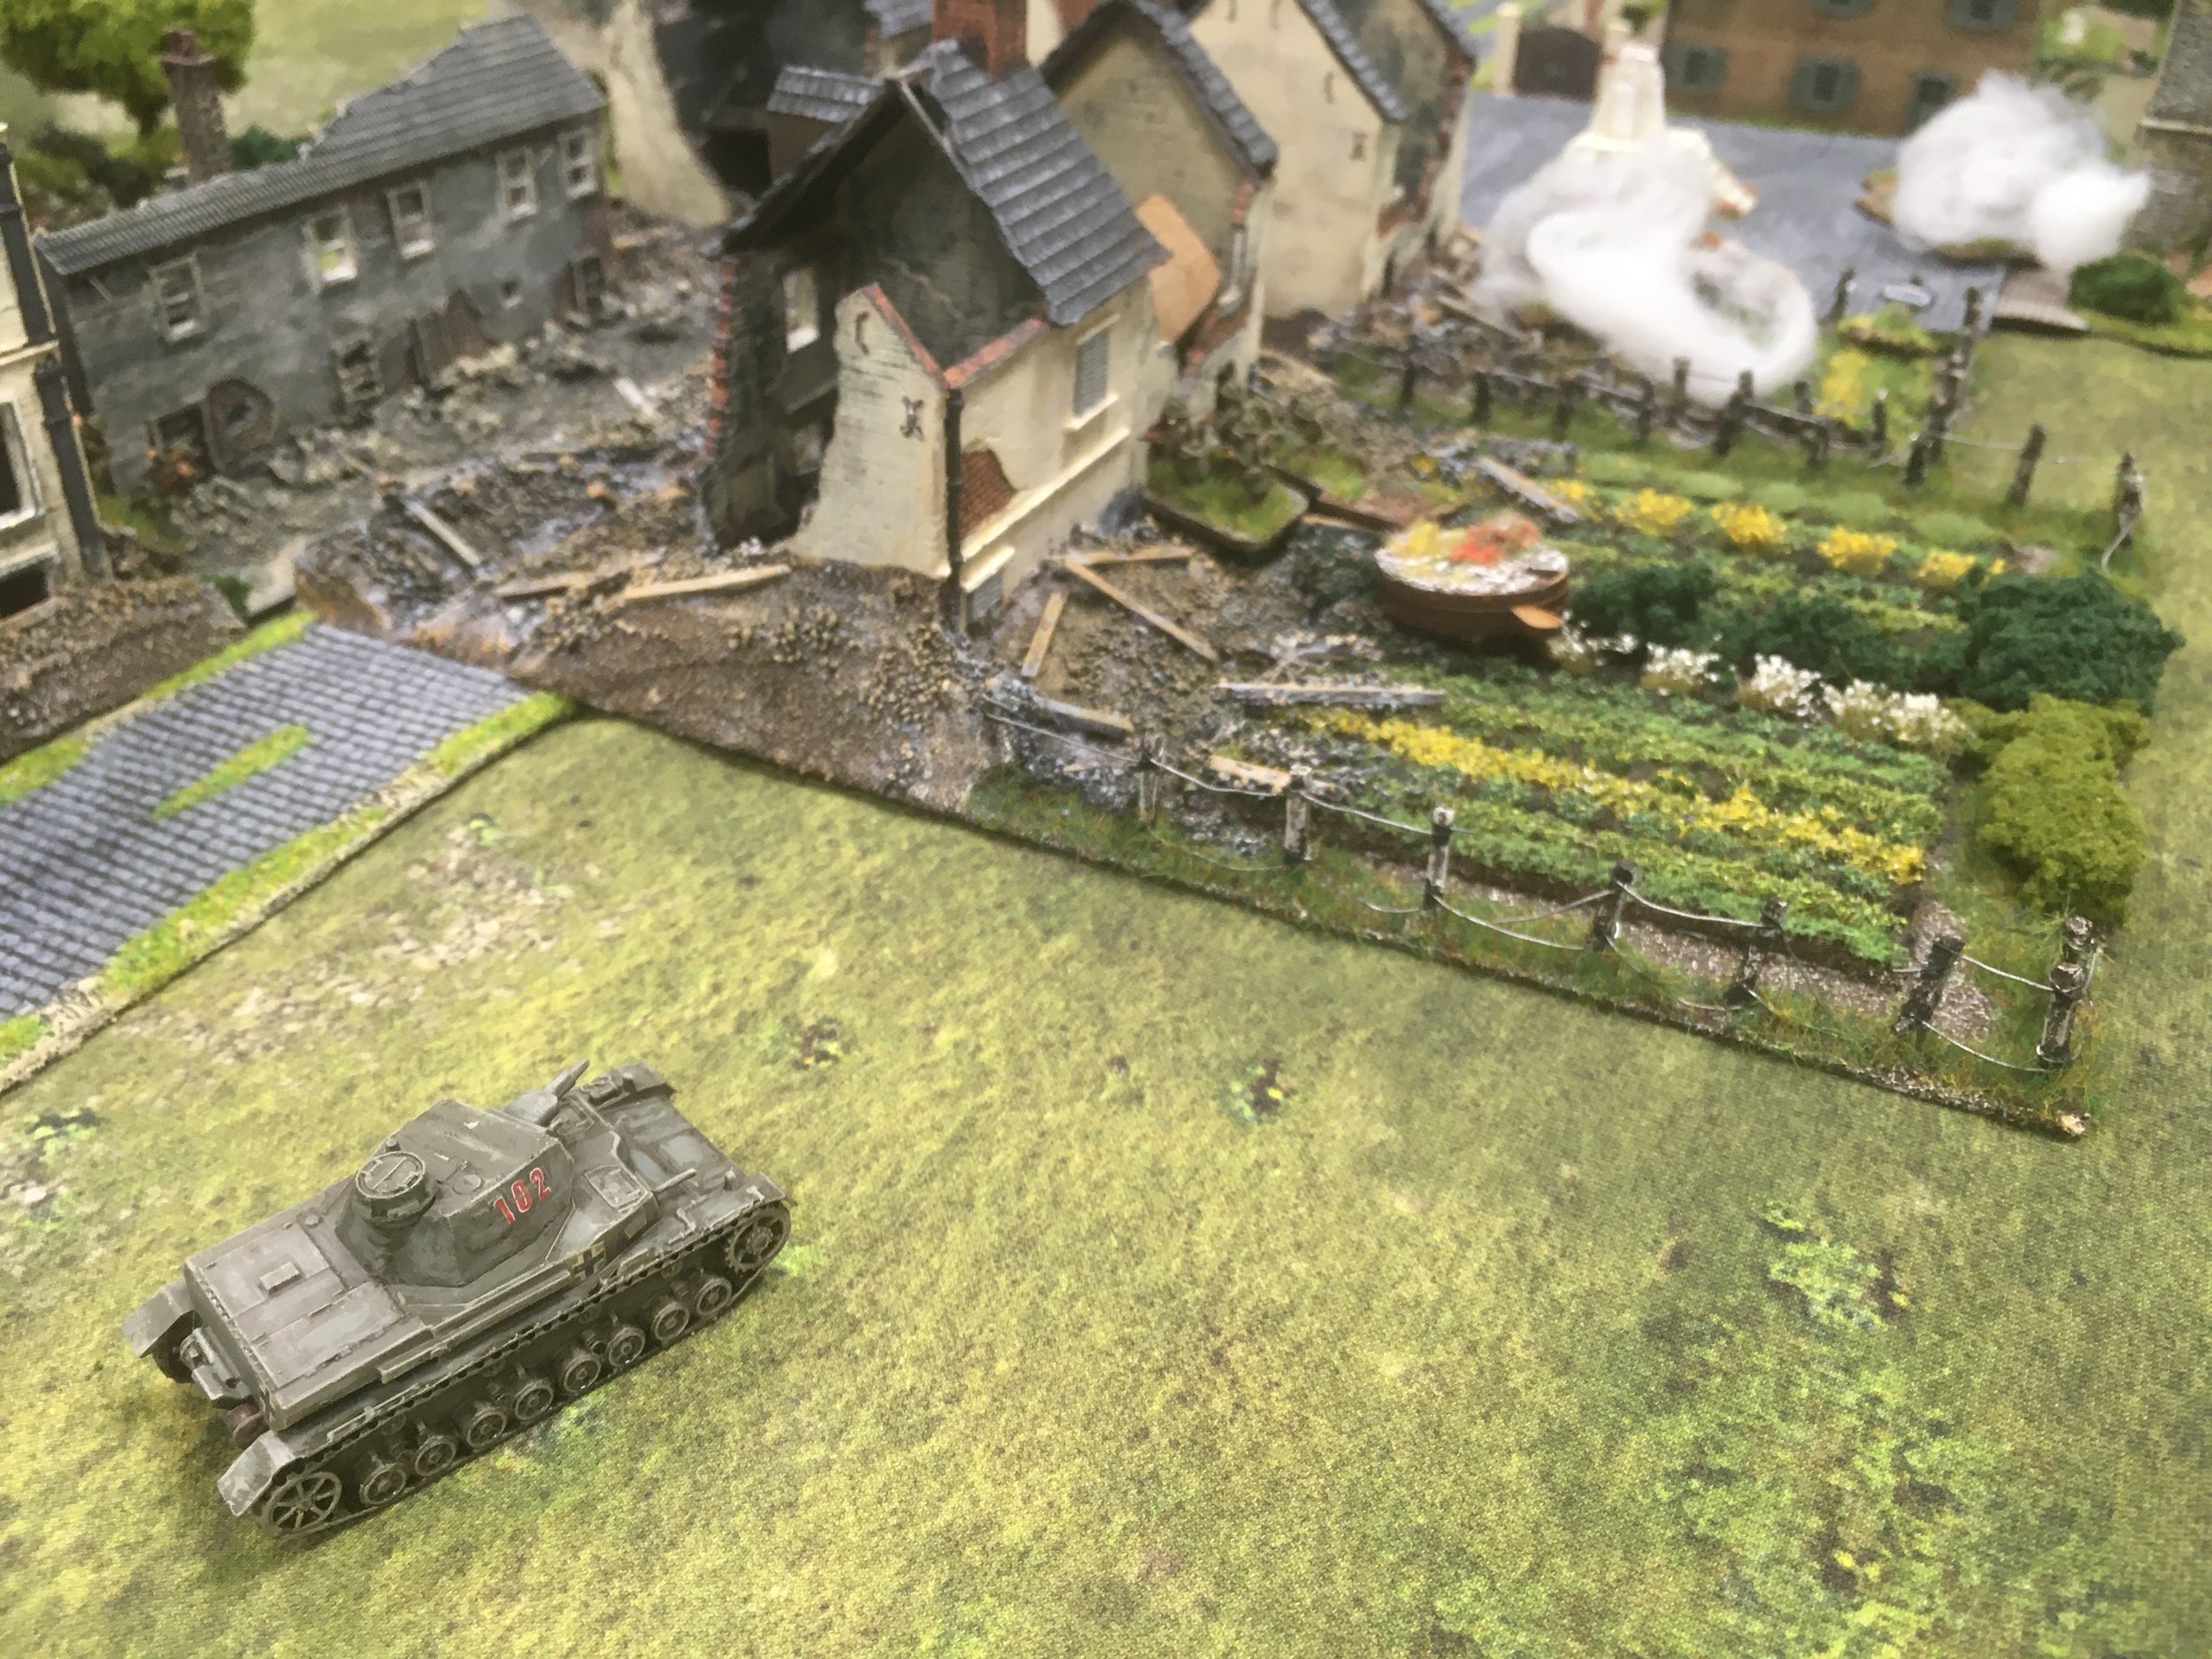 And then the second. The French infantry hide in the ruined buildings.